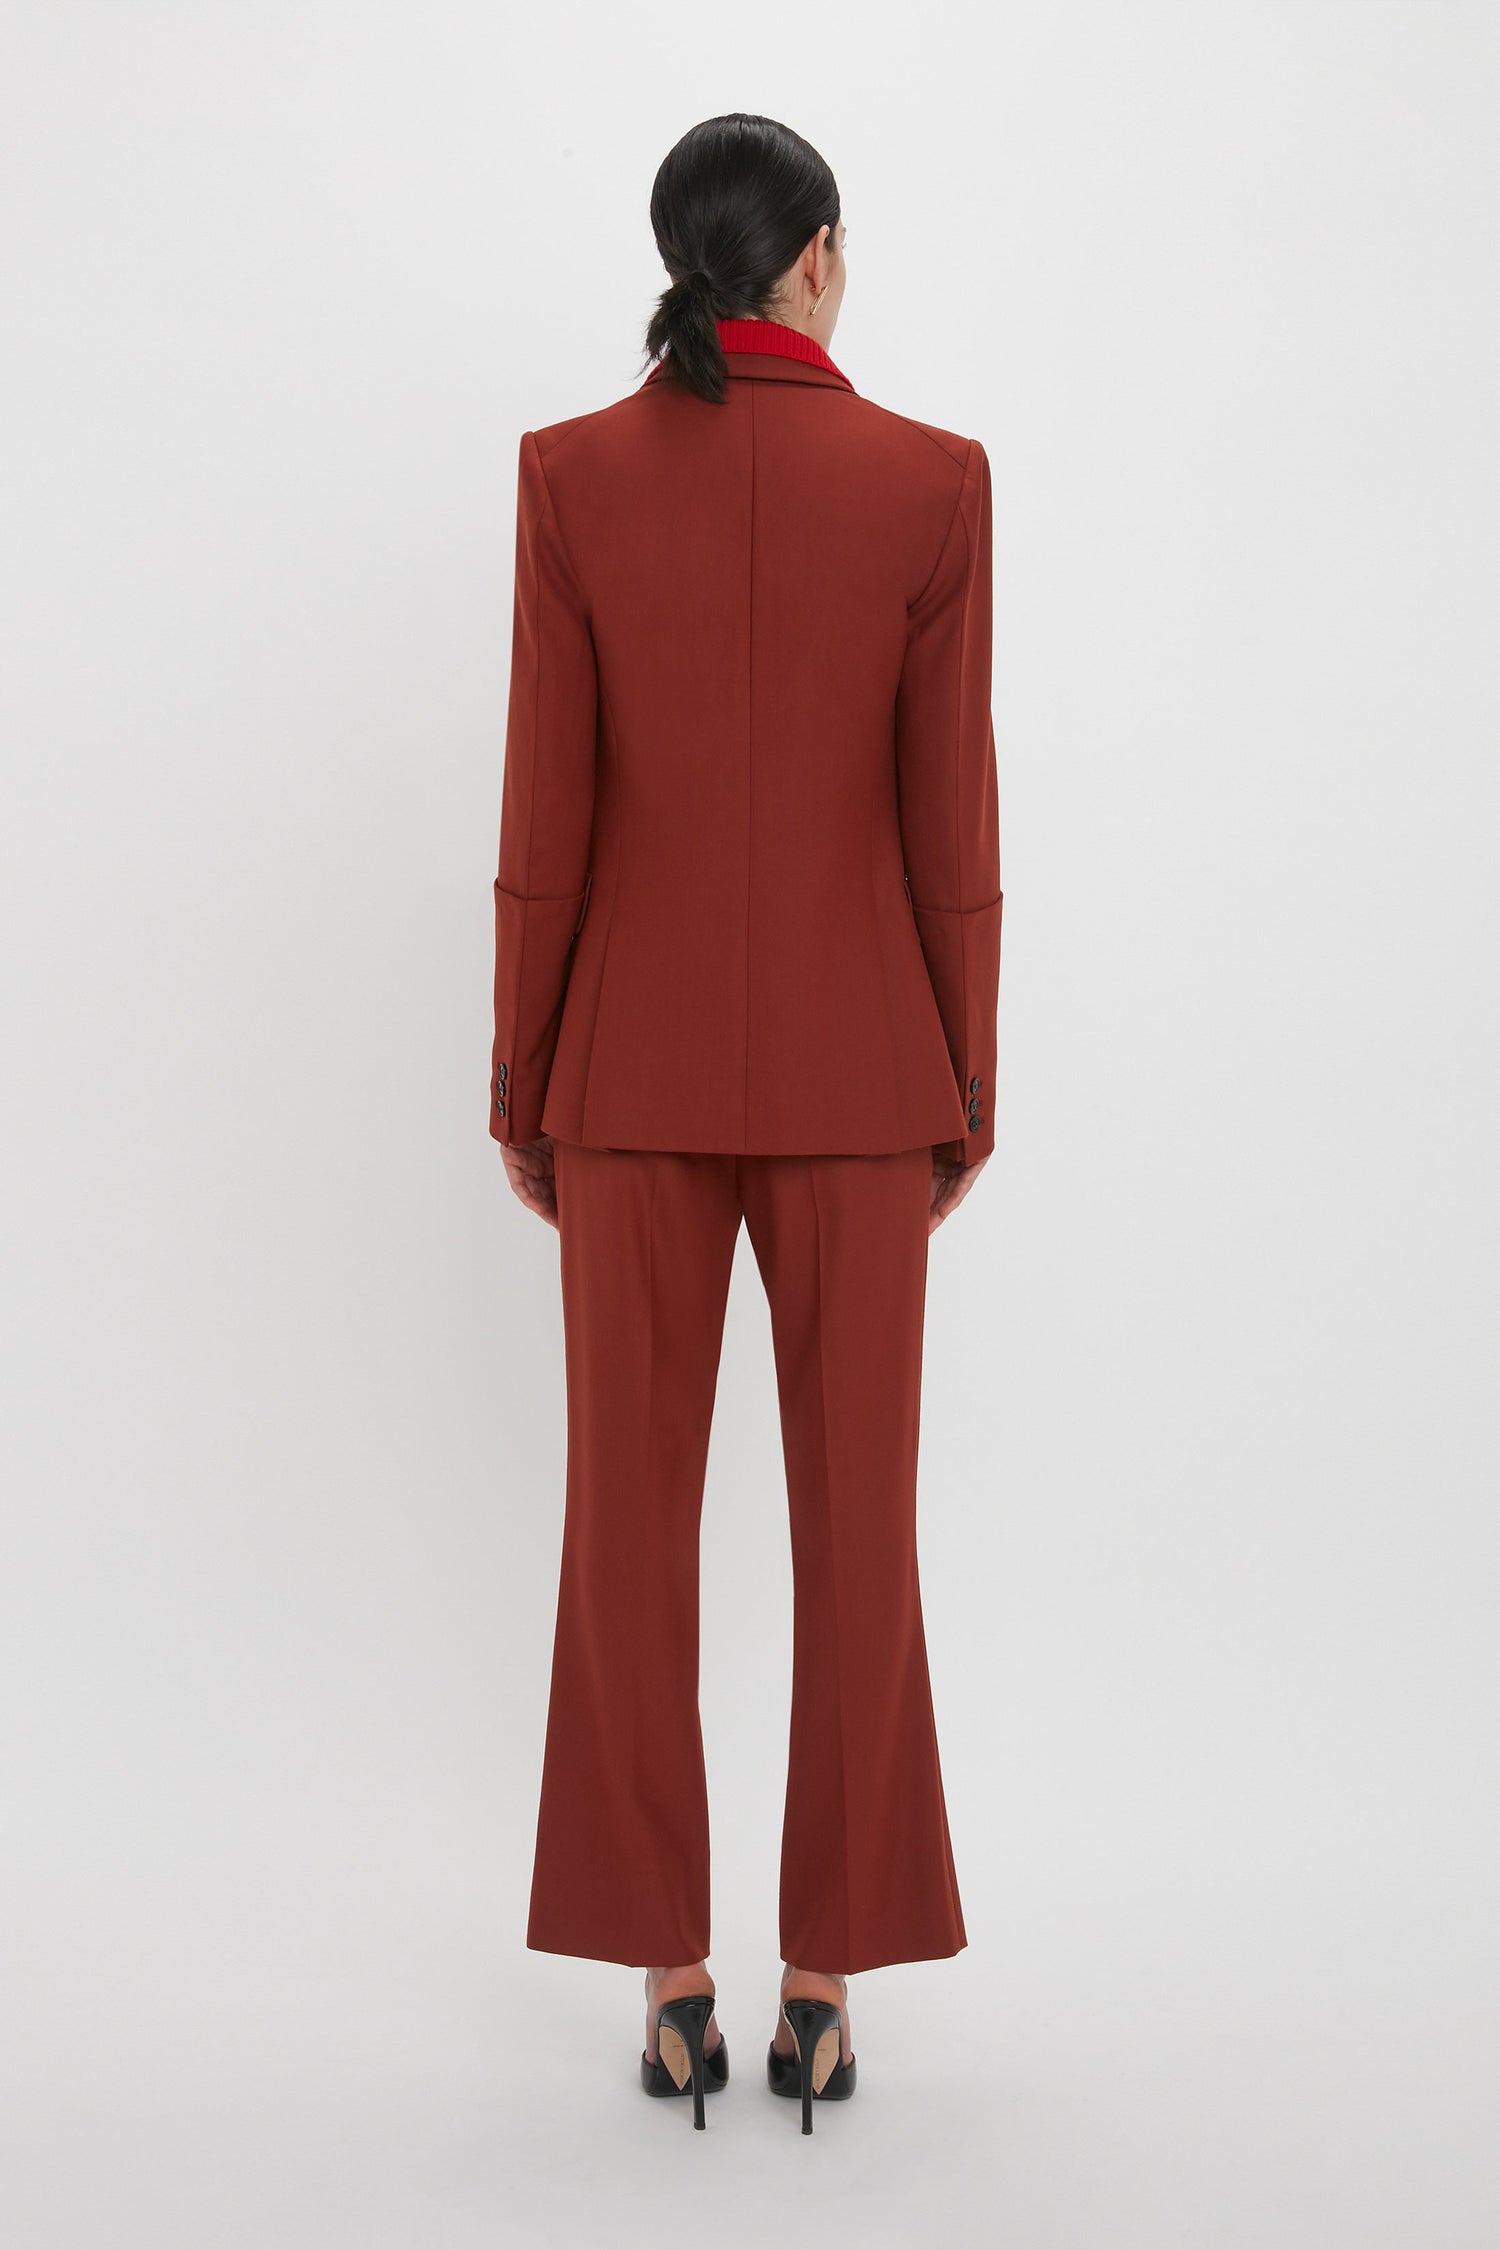 Person facing away from the camera, wearing a red blazer and matching Victoria Beckham Wide Cropped Flare Trouser In Russet, standing against a plain white background.